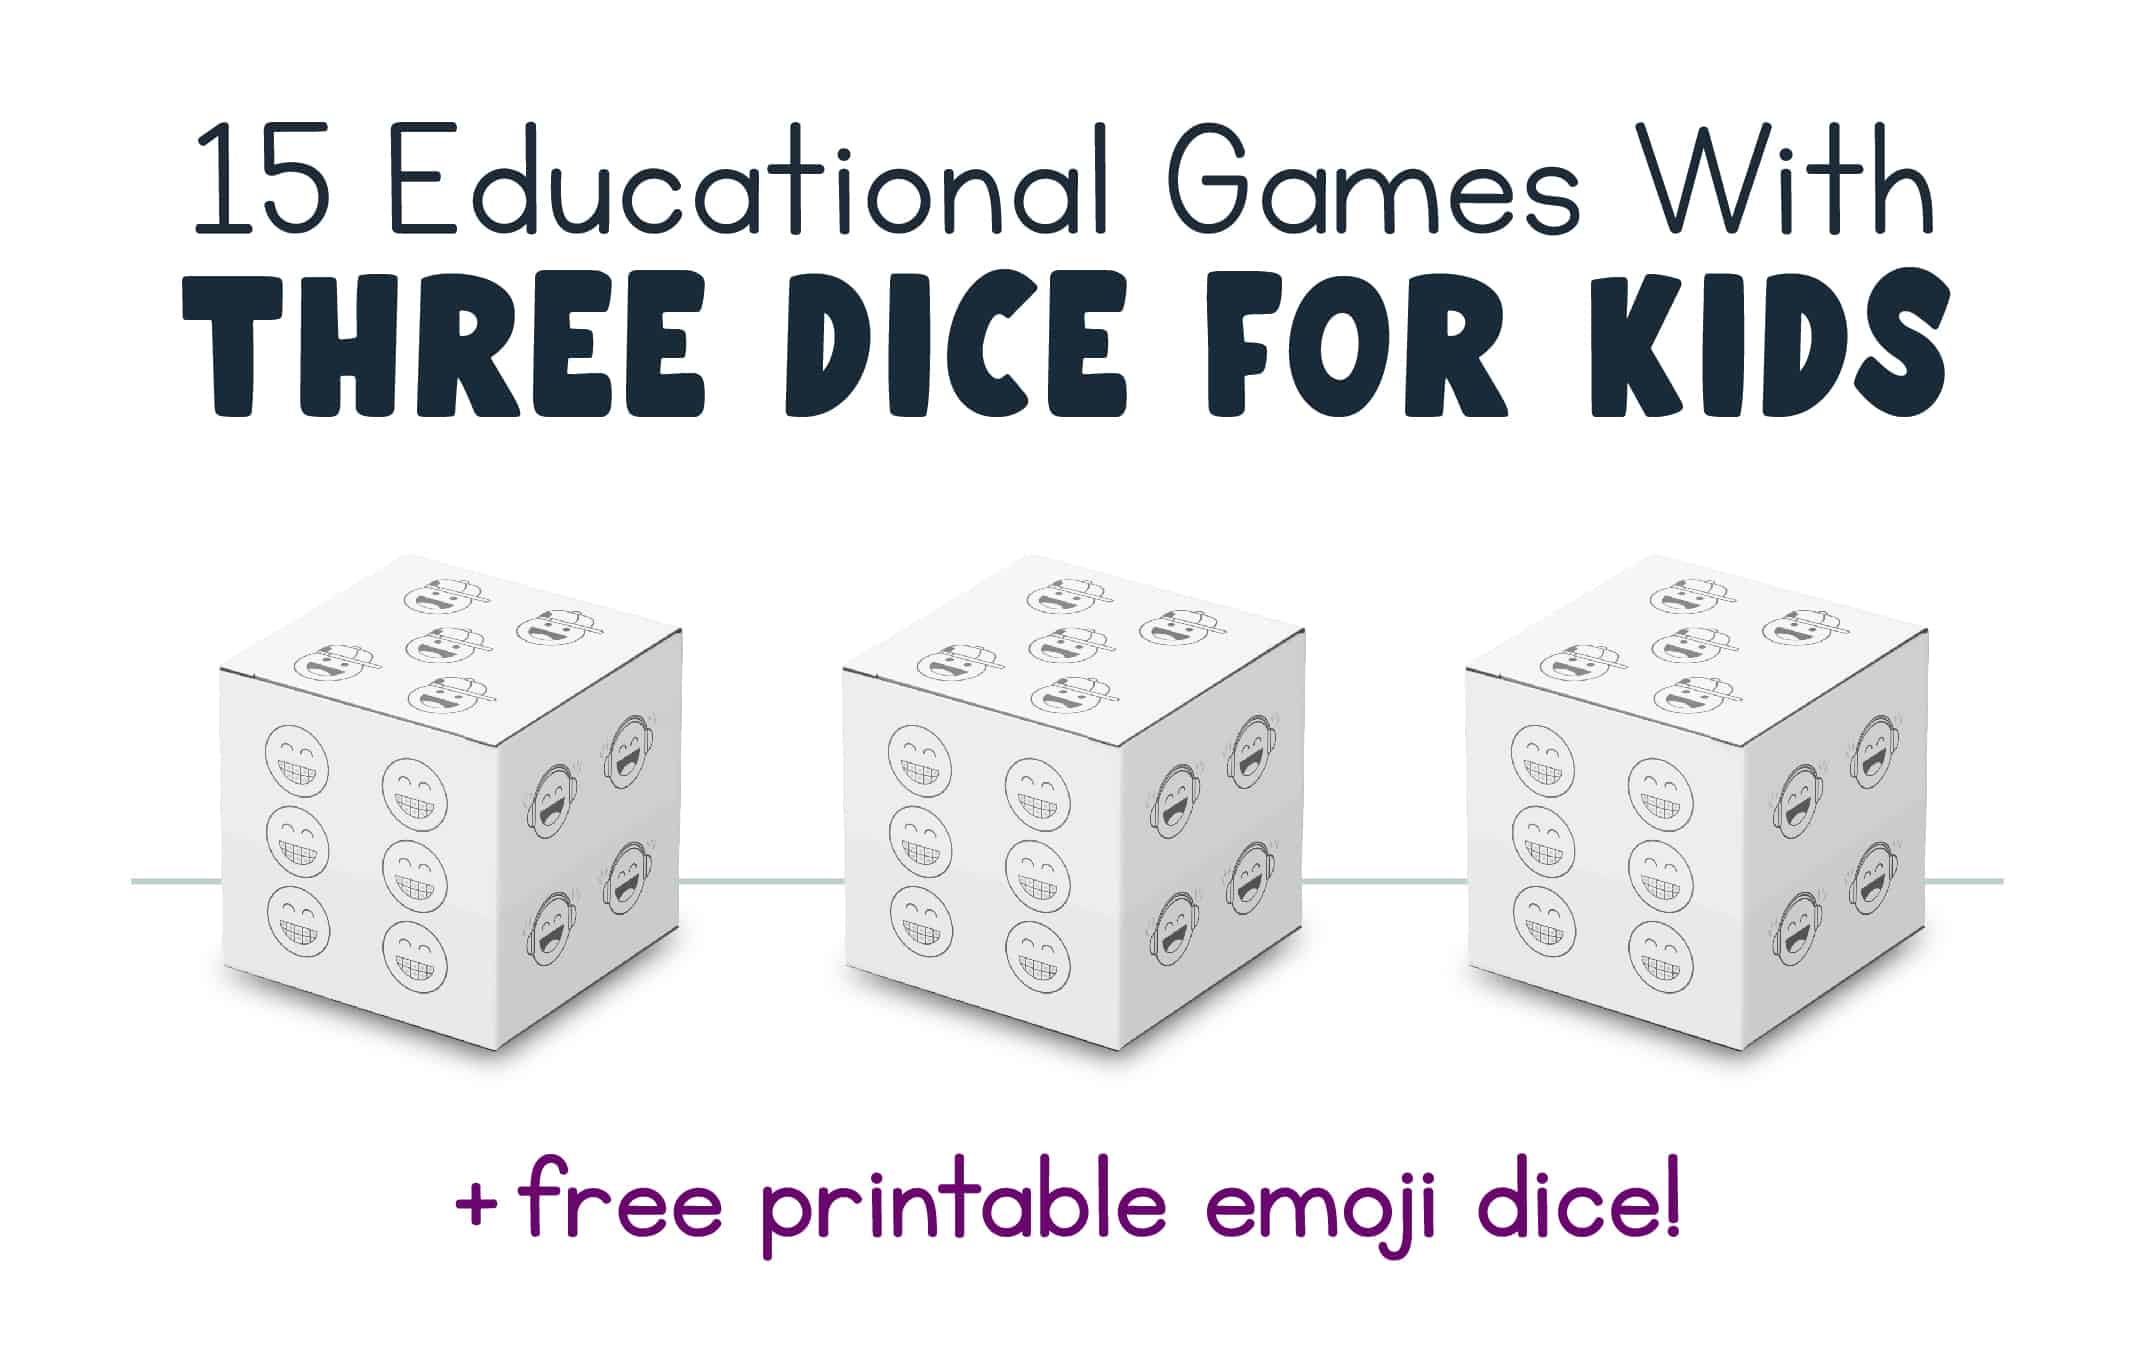 Fit Dice Version 2.0 - Great instant warm-up PE activity!